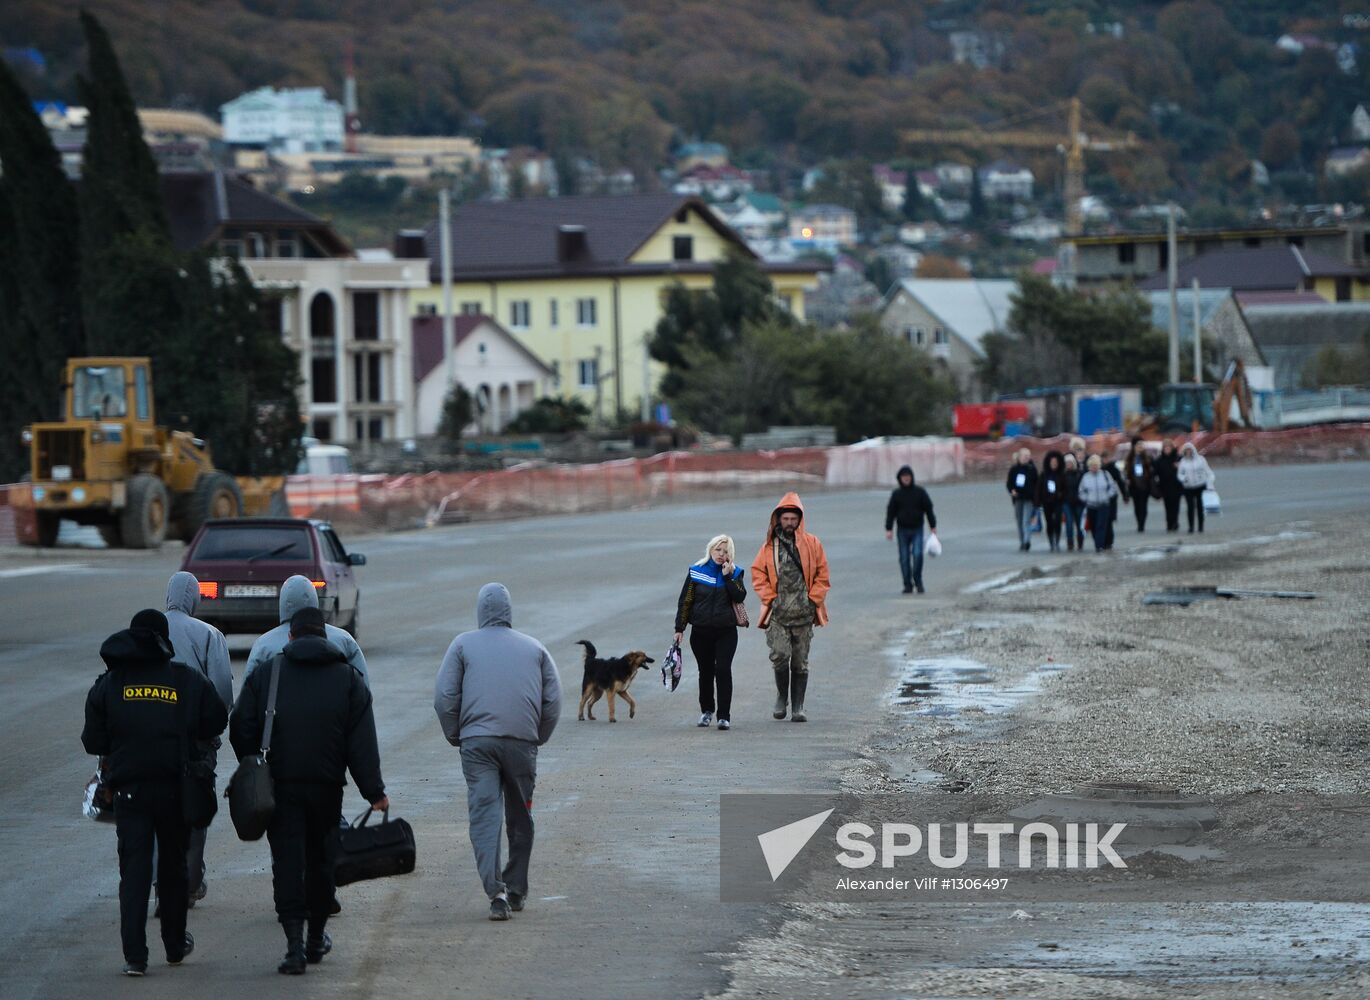 Construction of Olympic facilities in Sochi's Imereti Valley